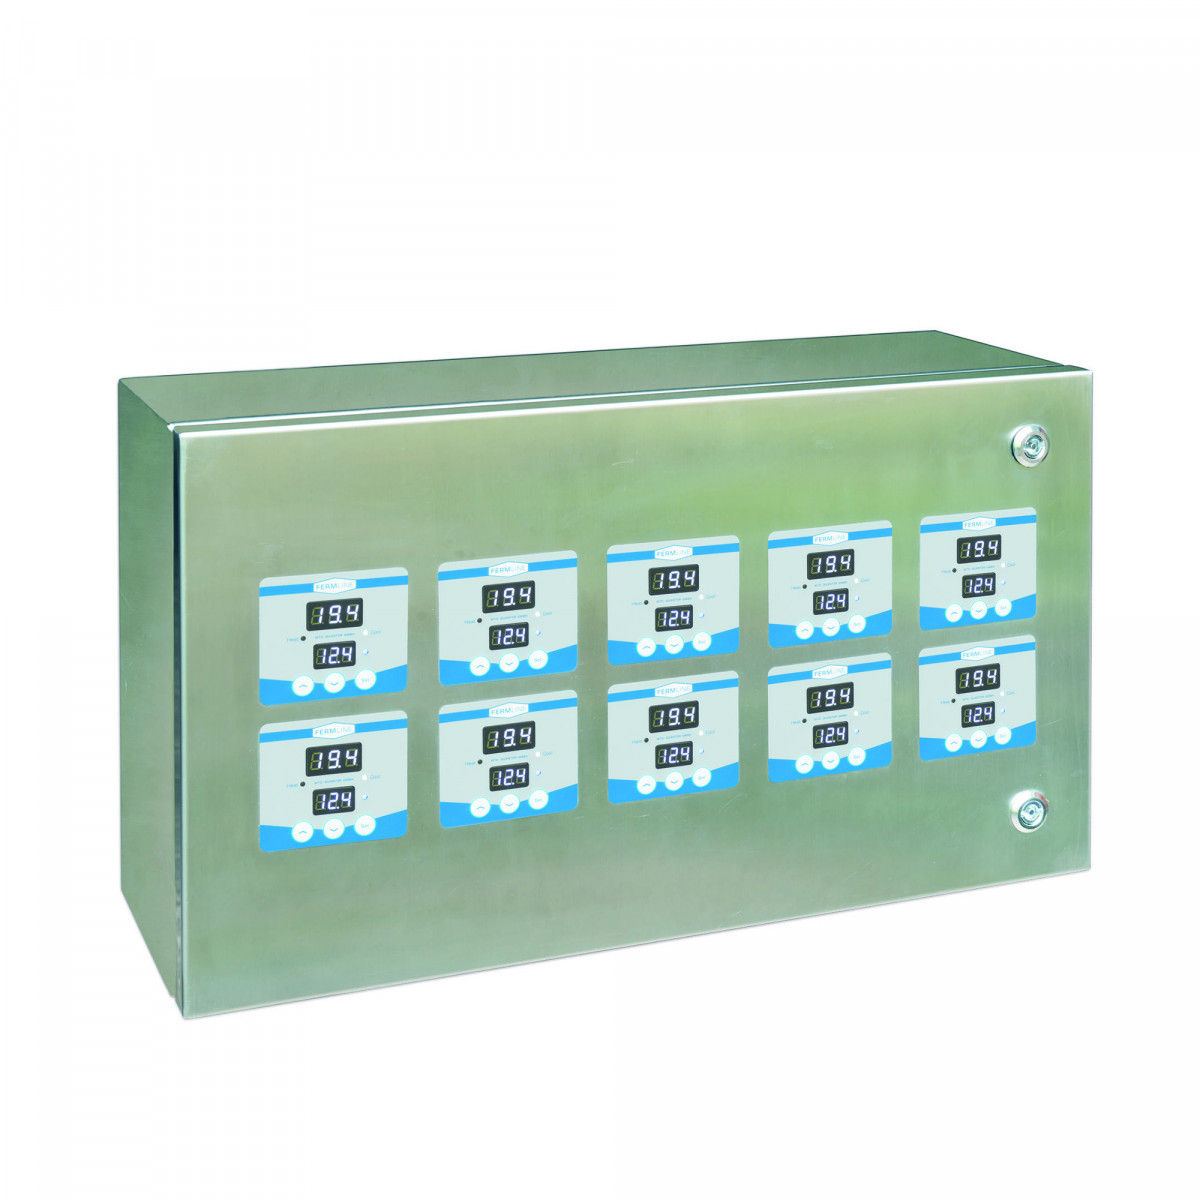 FermFlex-Box SST control cabinet for 20 controllers